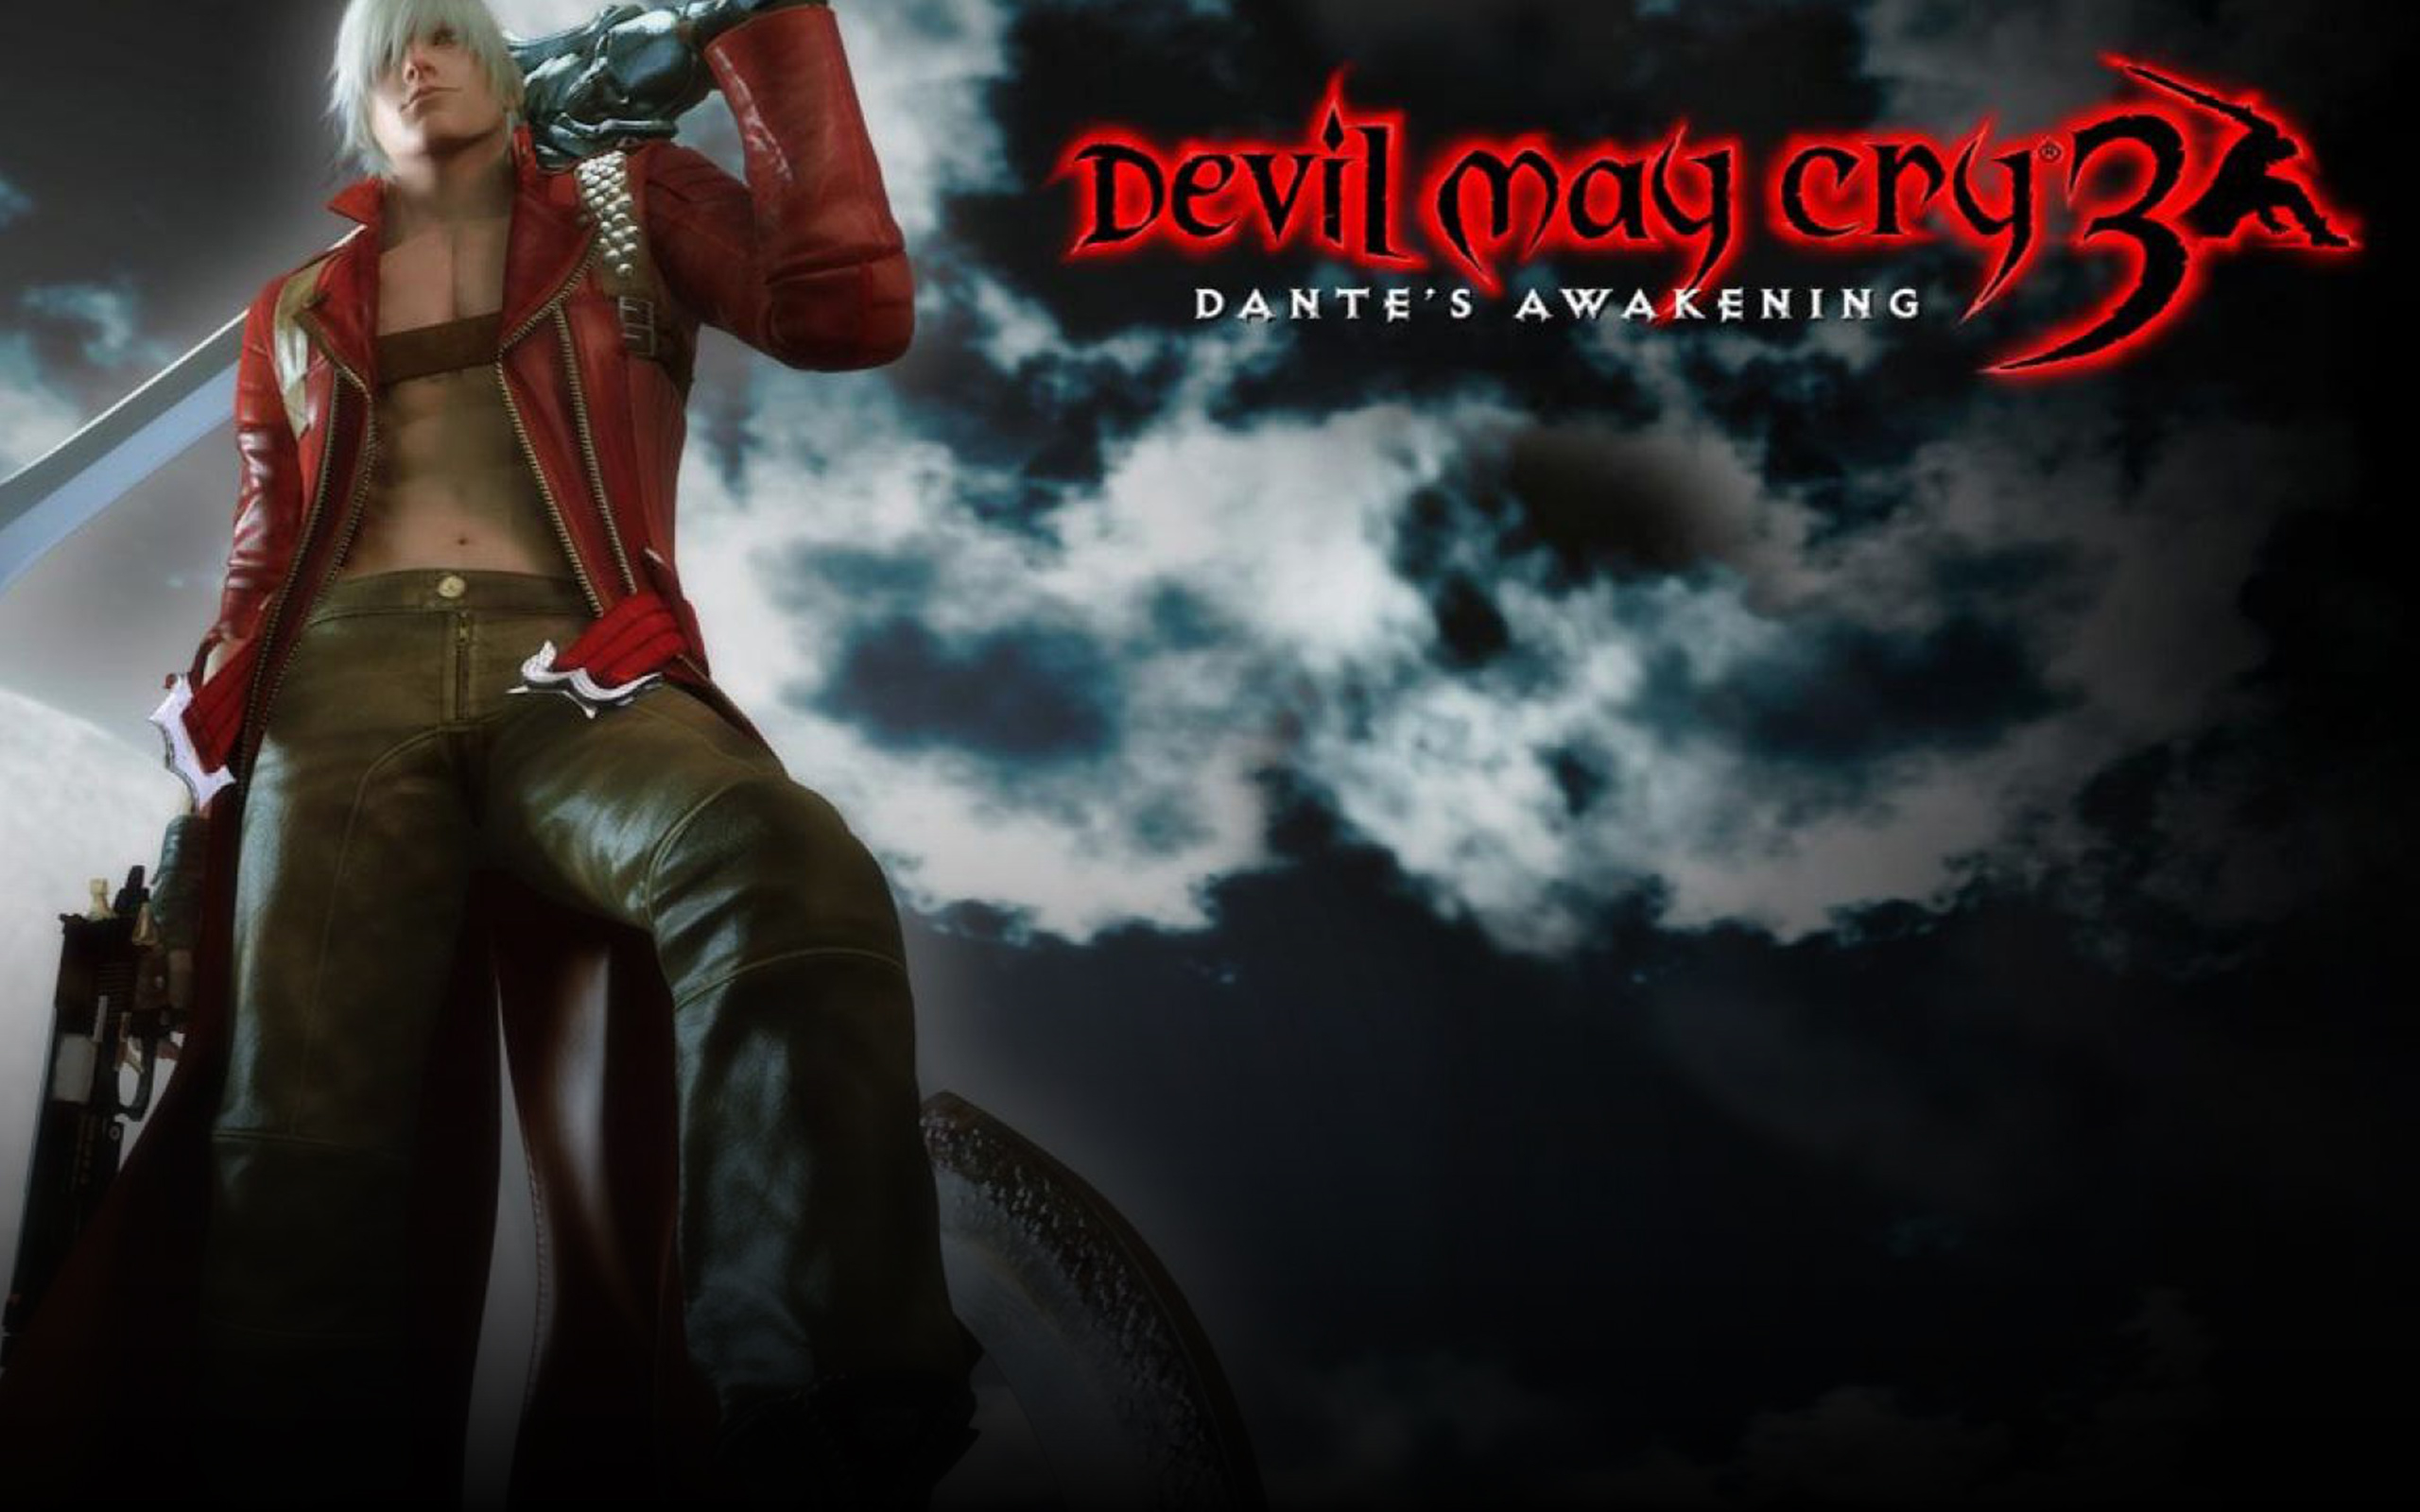 Devil may cry 3 can find steam фото 14